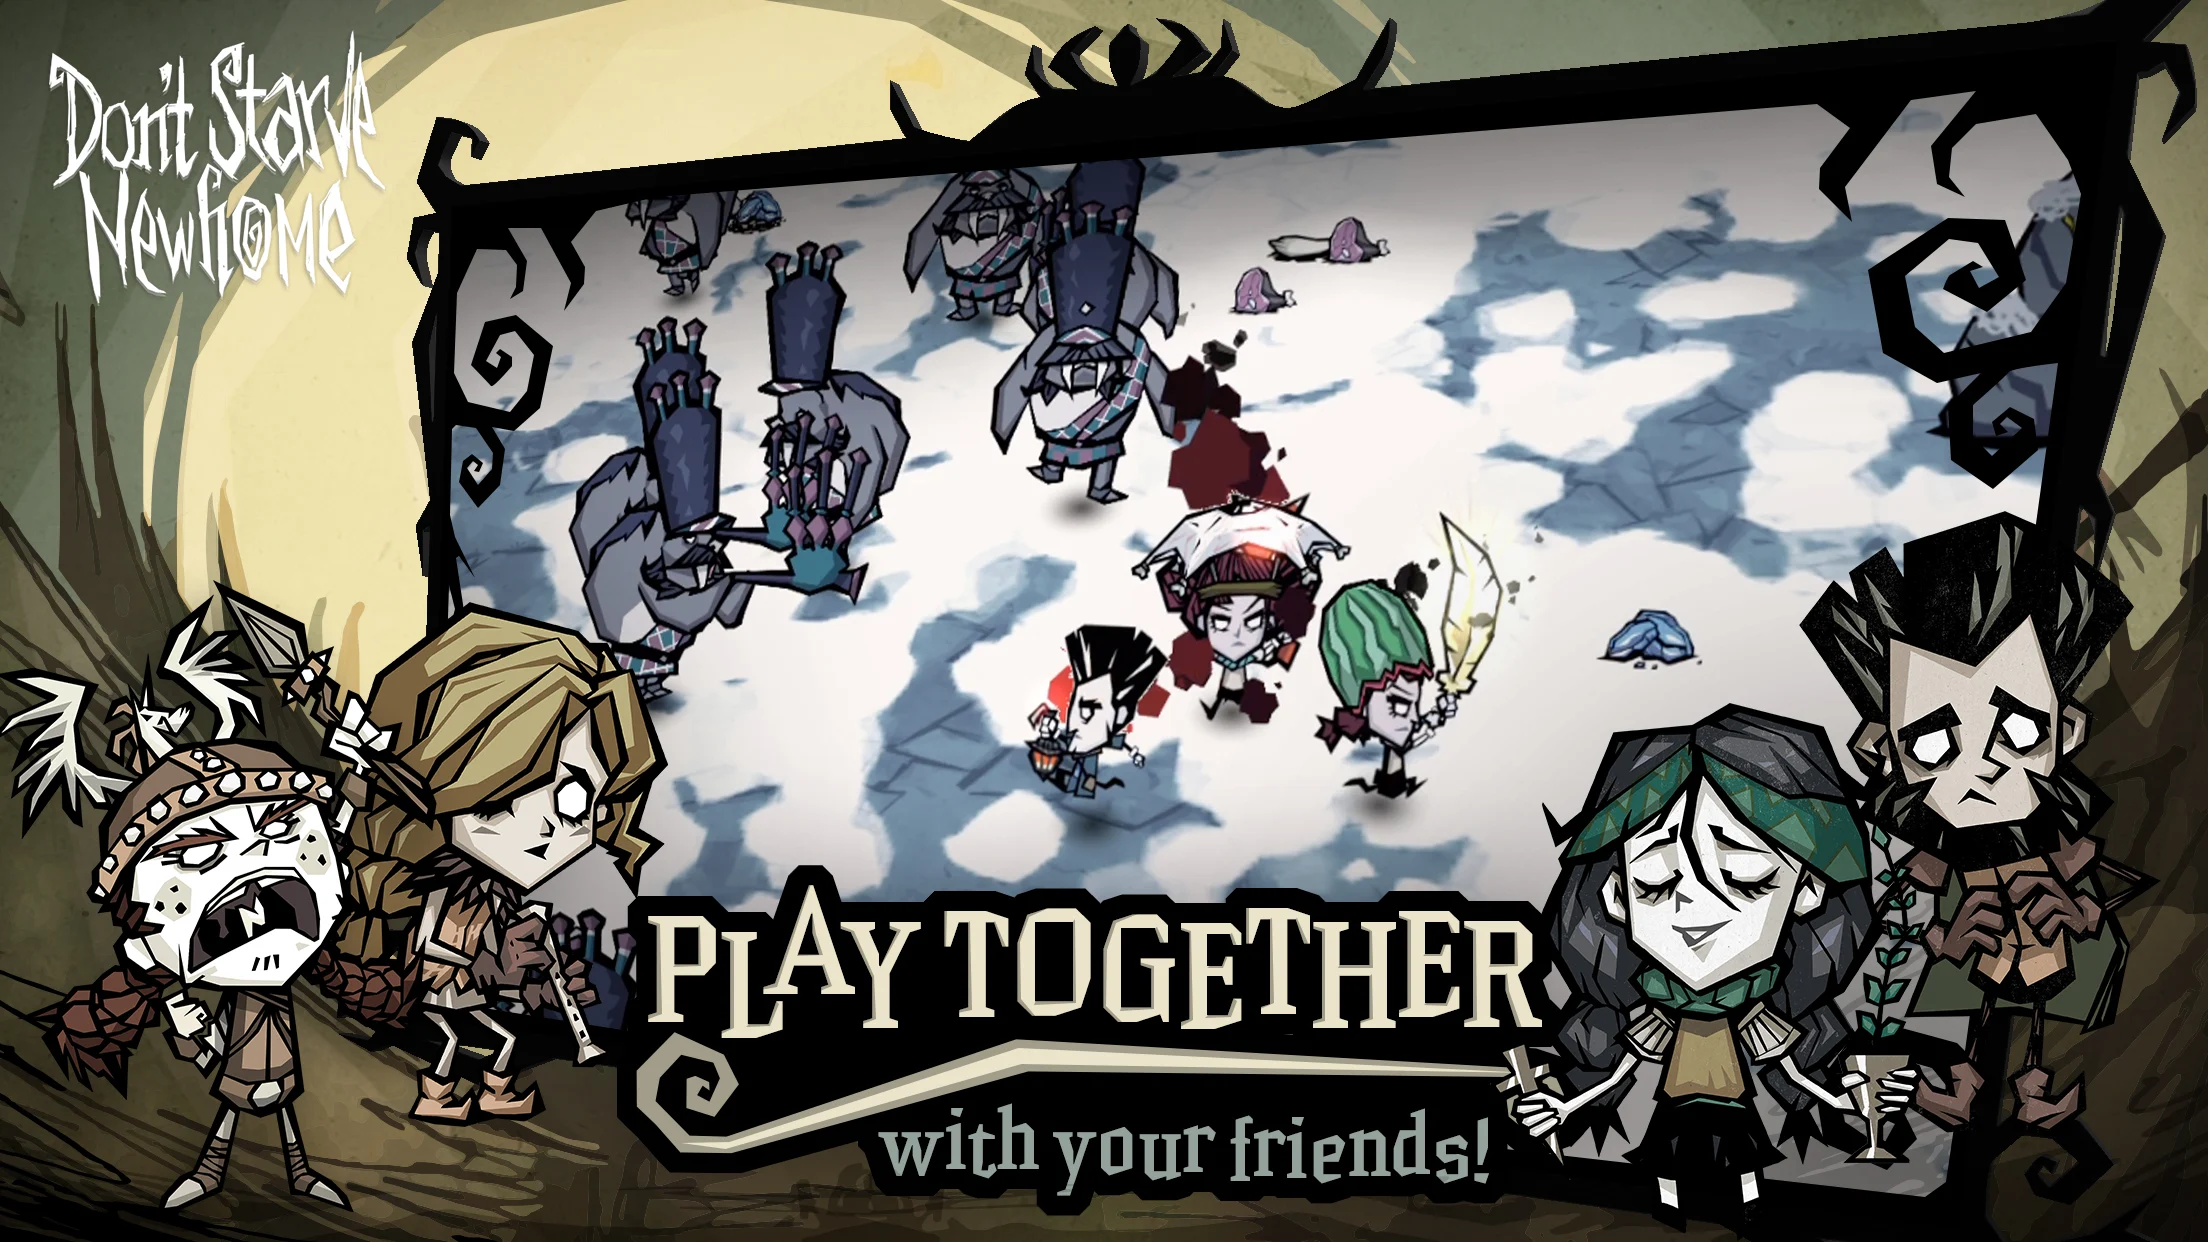 Screenshot of Don't Starve: Newhome (Beta)